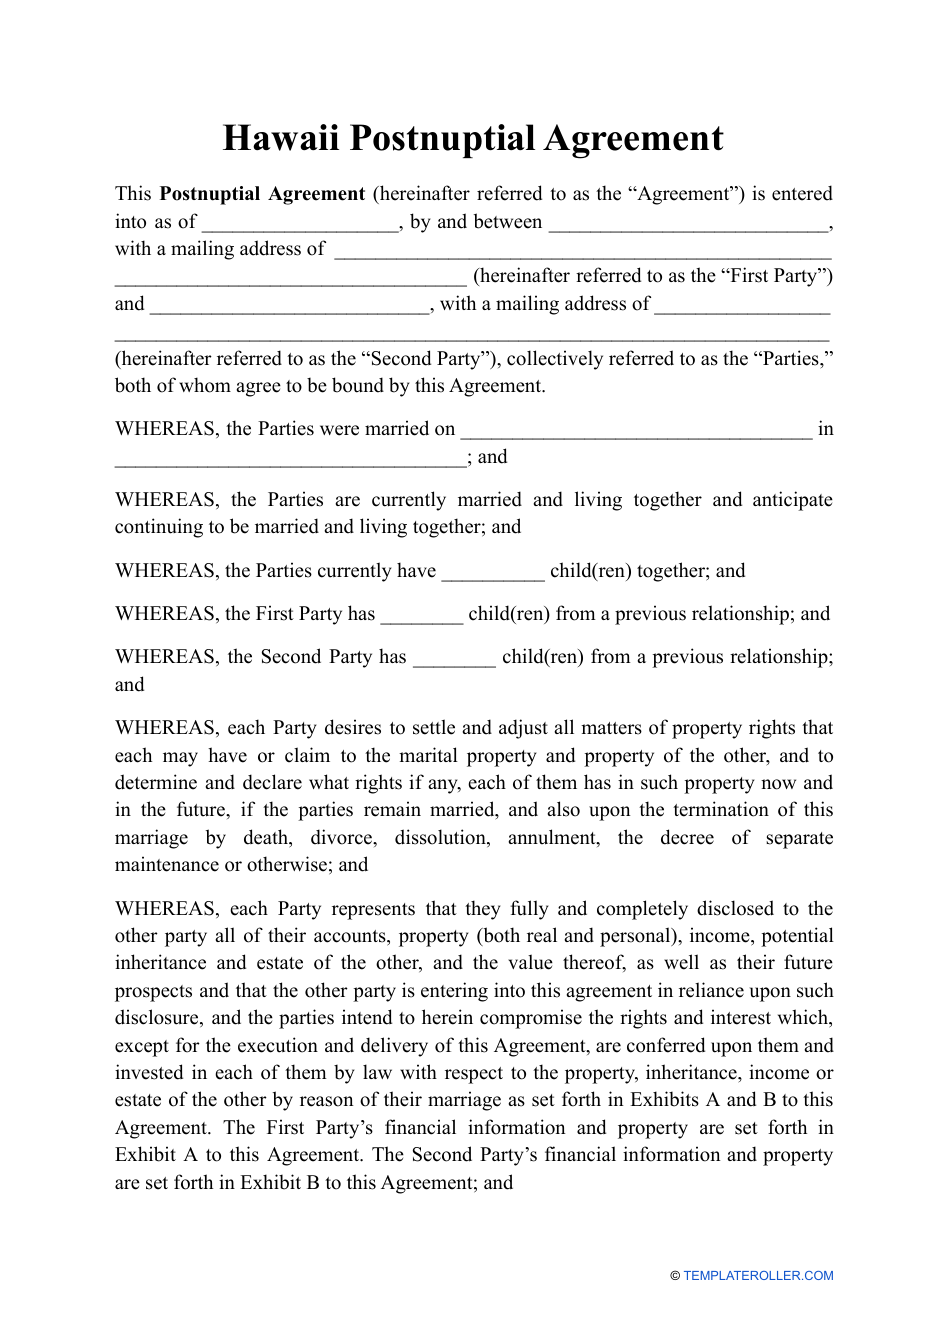 Postnuptial Agreement Template - Hawaii, Page 1